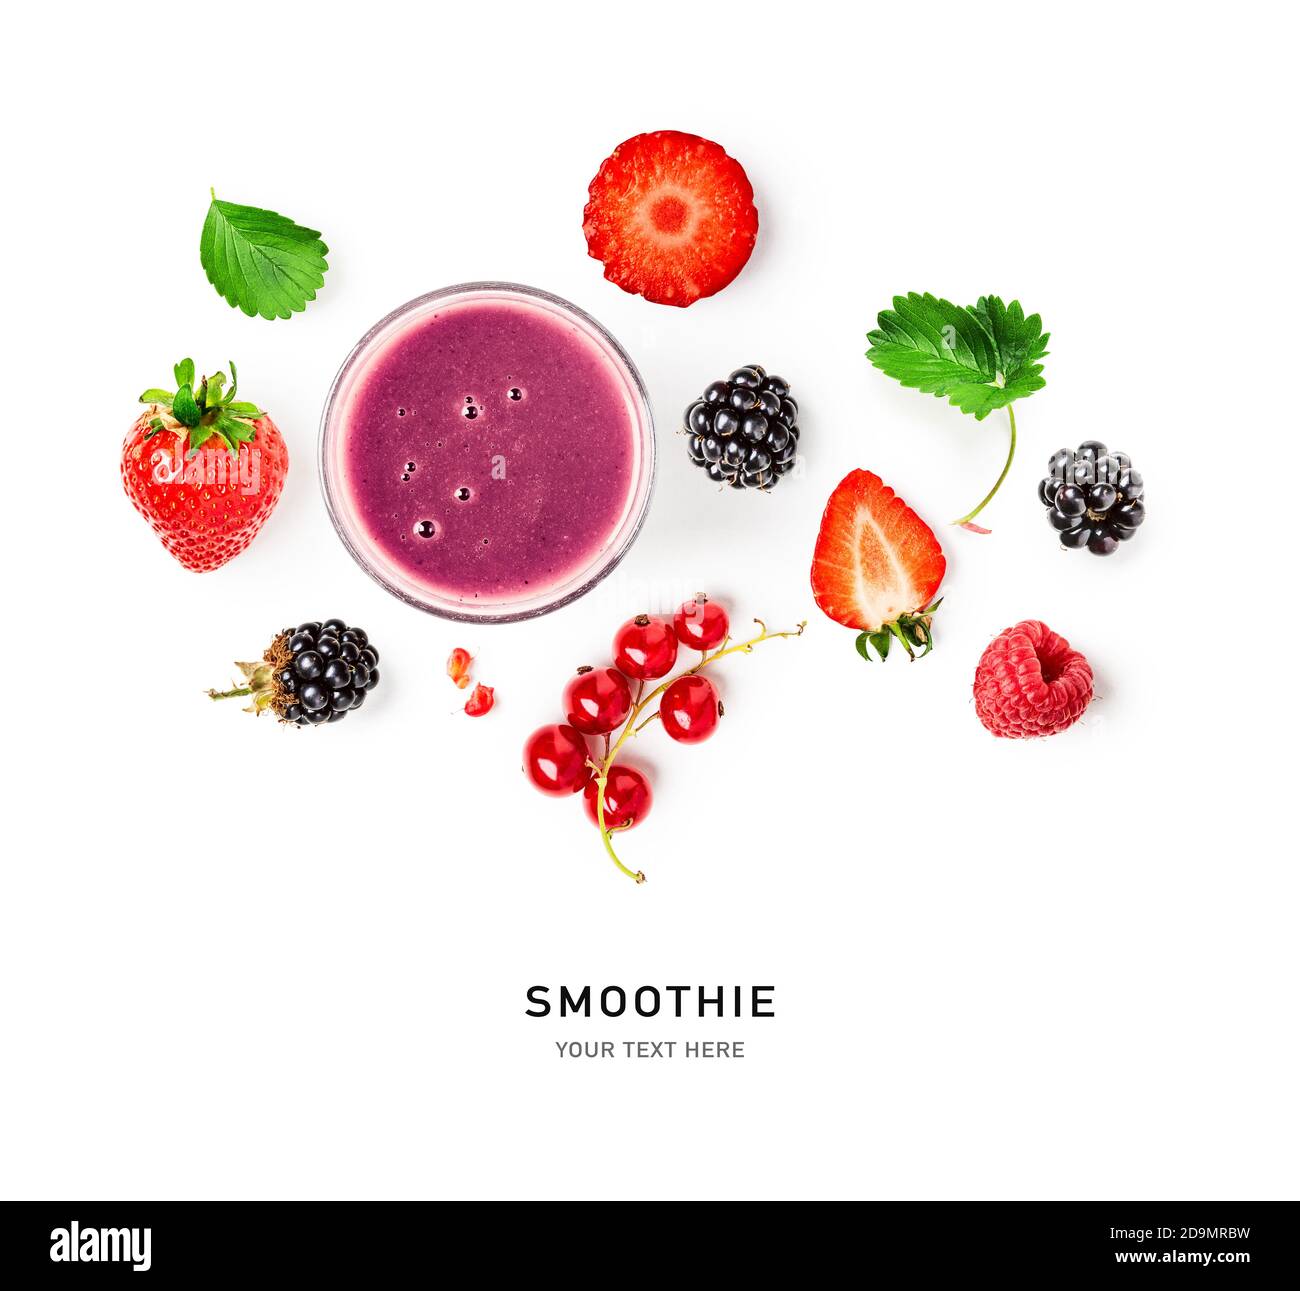 Smoothie, strawberry, blackberry, currant and raspberry creative layout on white background. Healthy eating and dieting food concept. Fresh summer fru Stock Photo